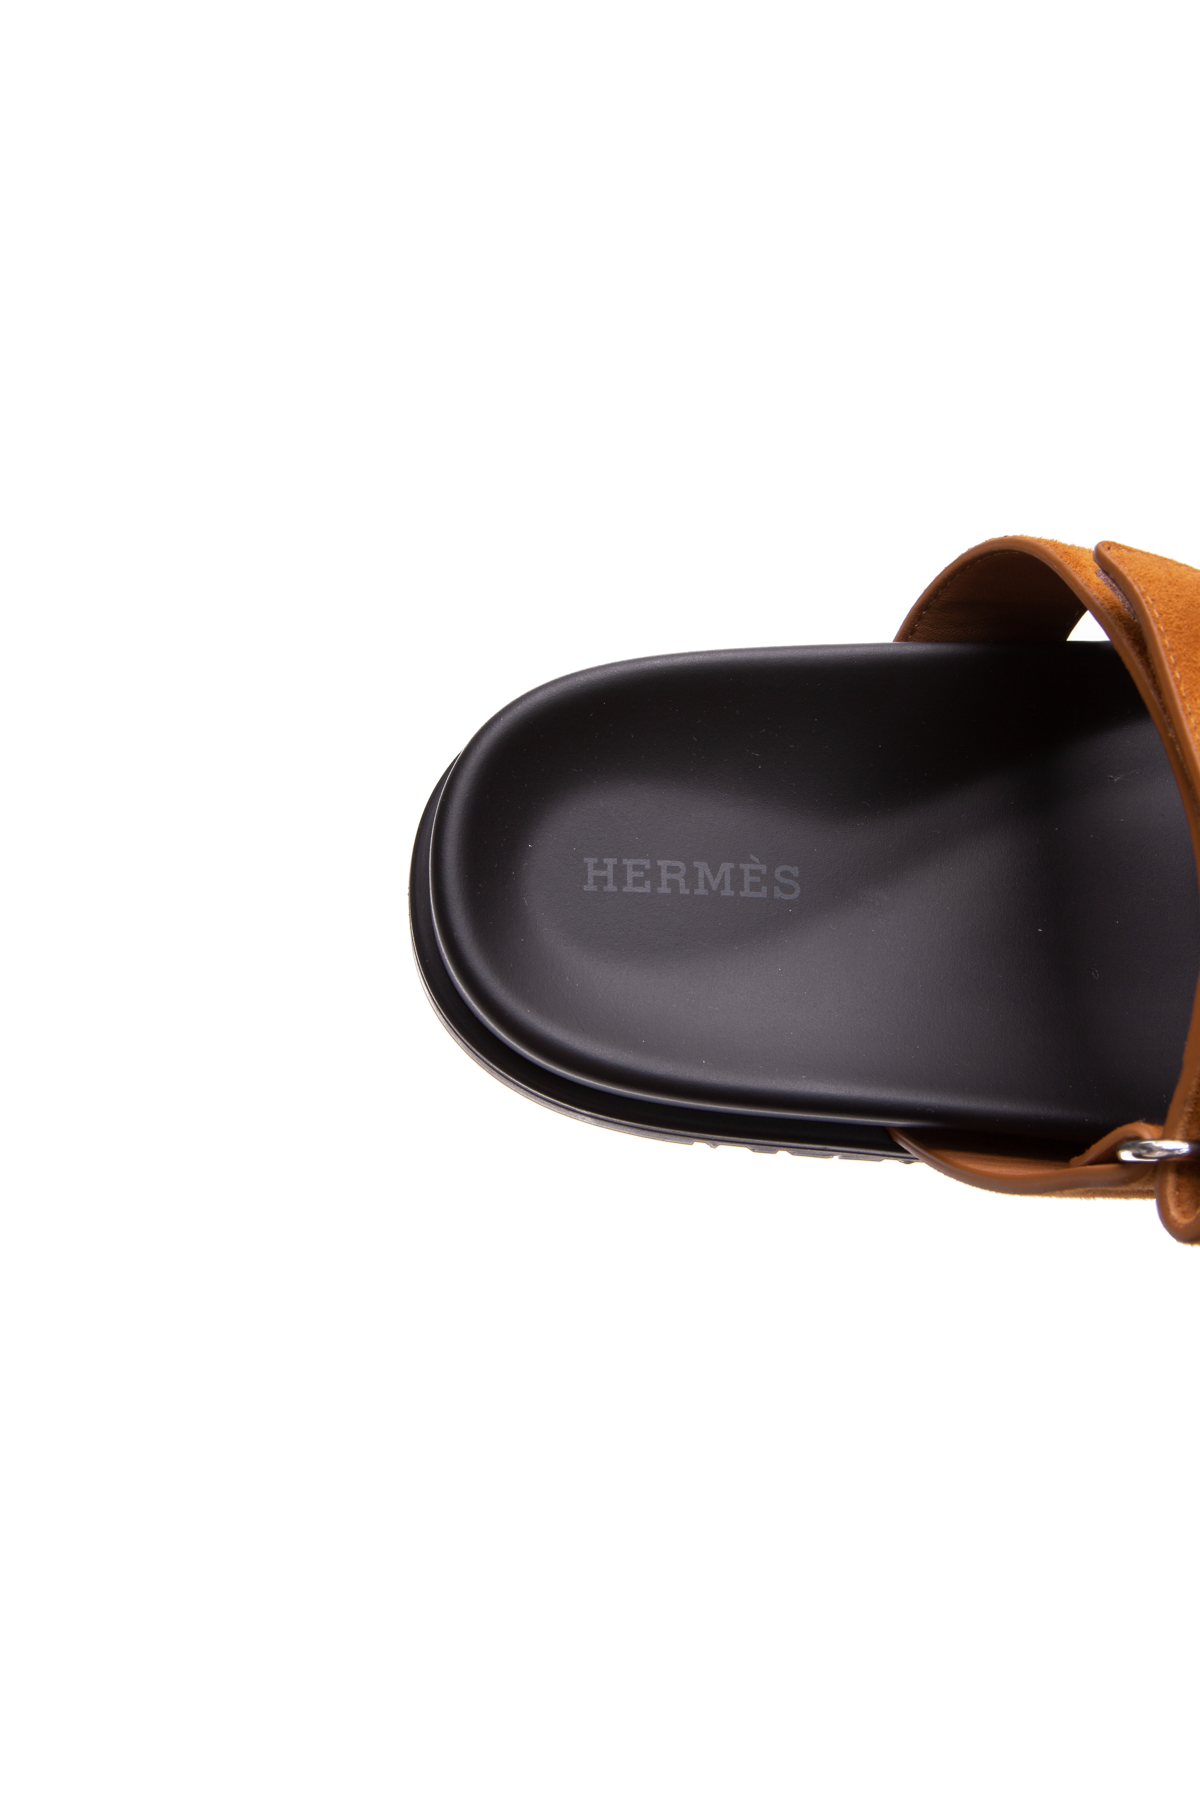 Hermes Brown Leather Chypre Sandals Size 40 Hermes